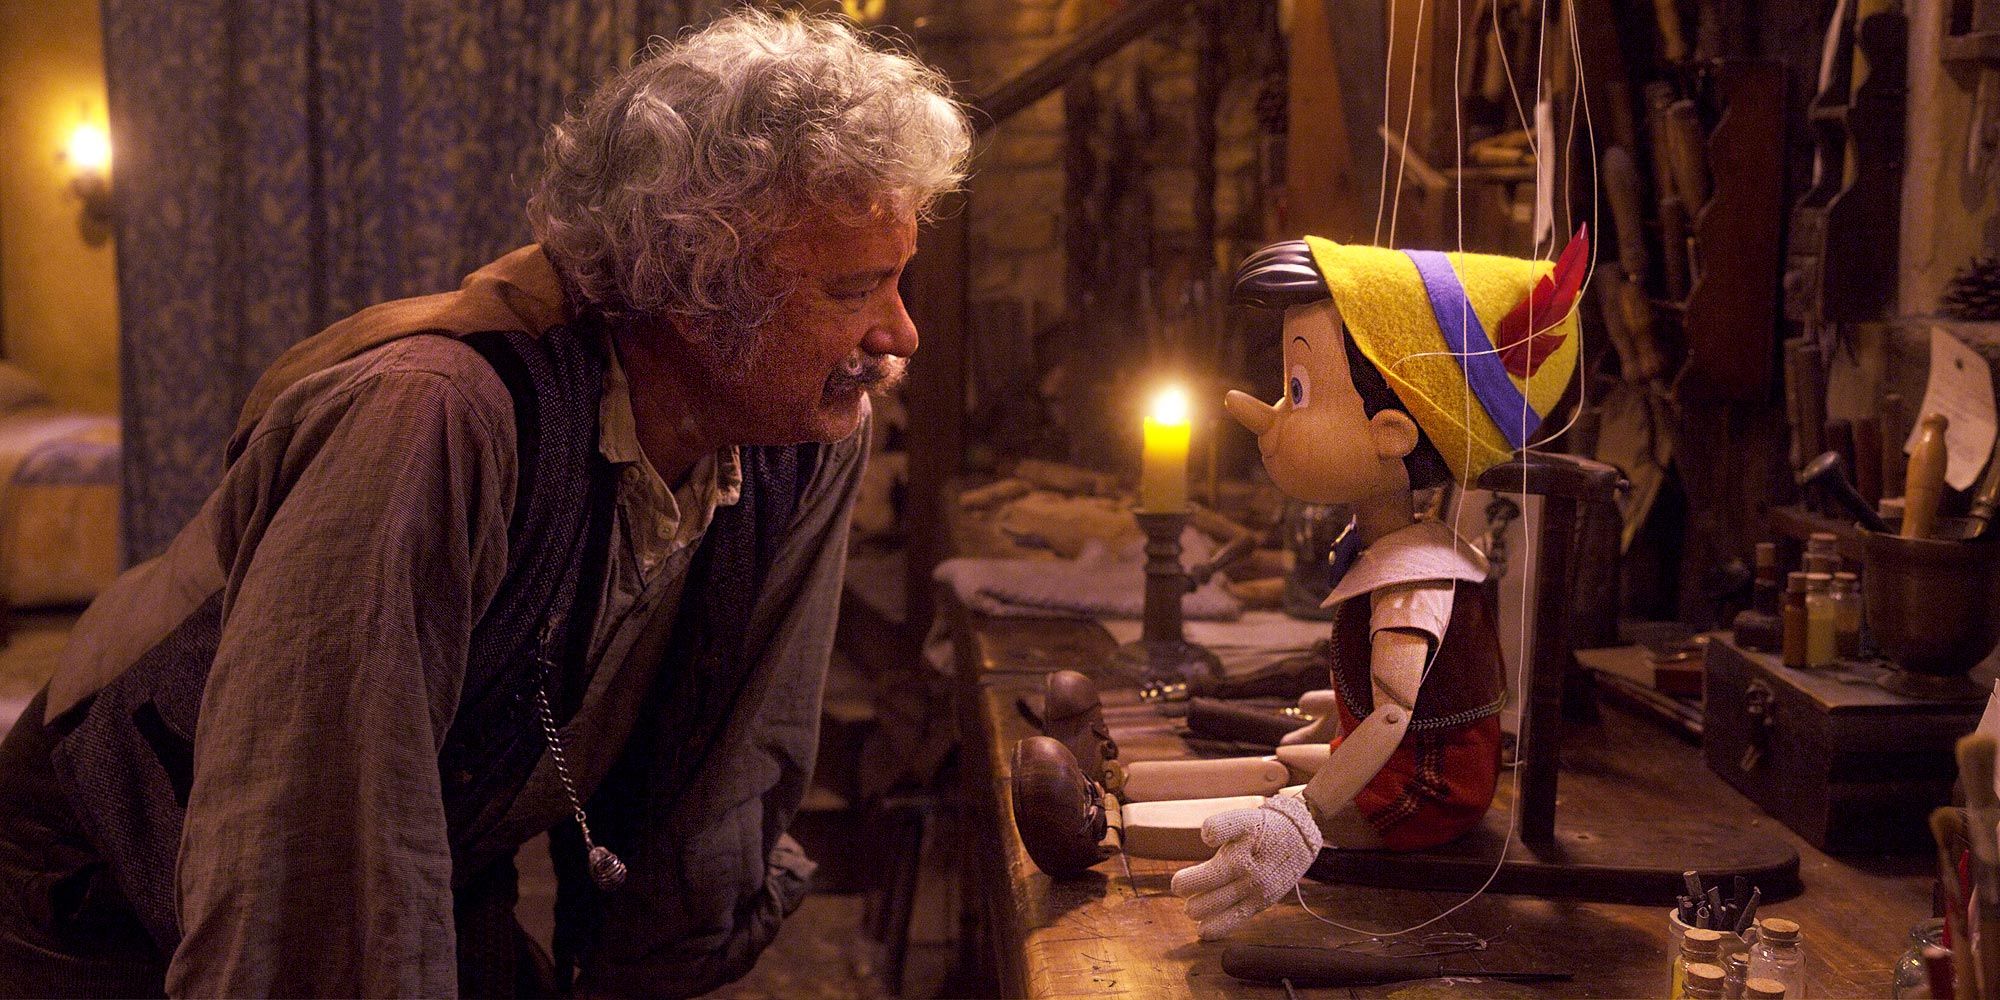 Tom Hanks as Geppetto talking to Pinocchio.